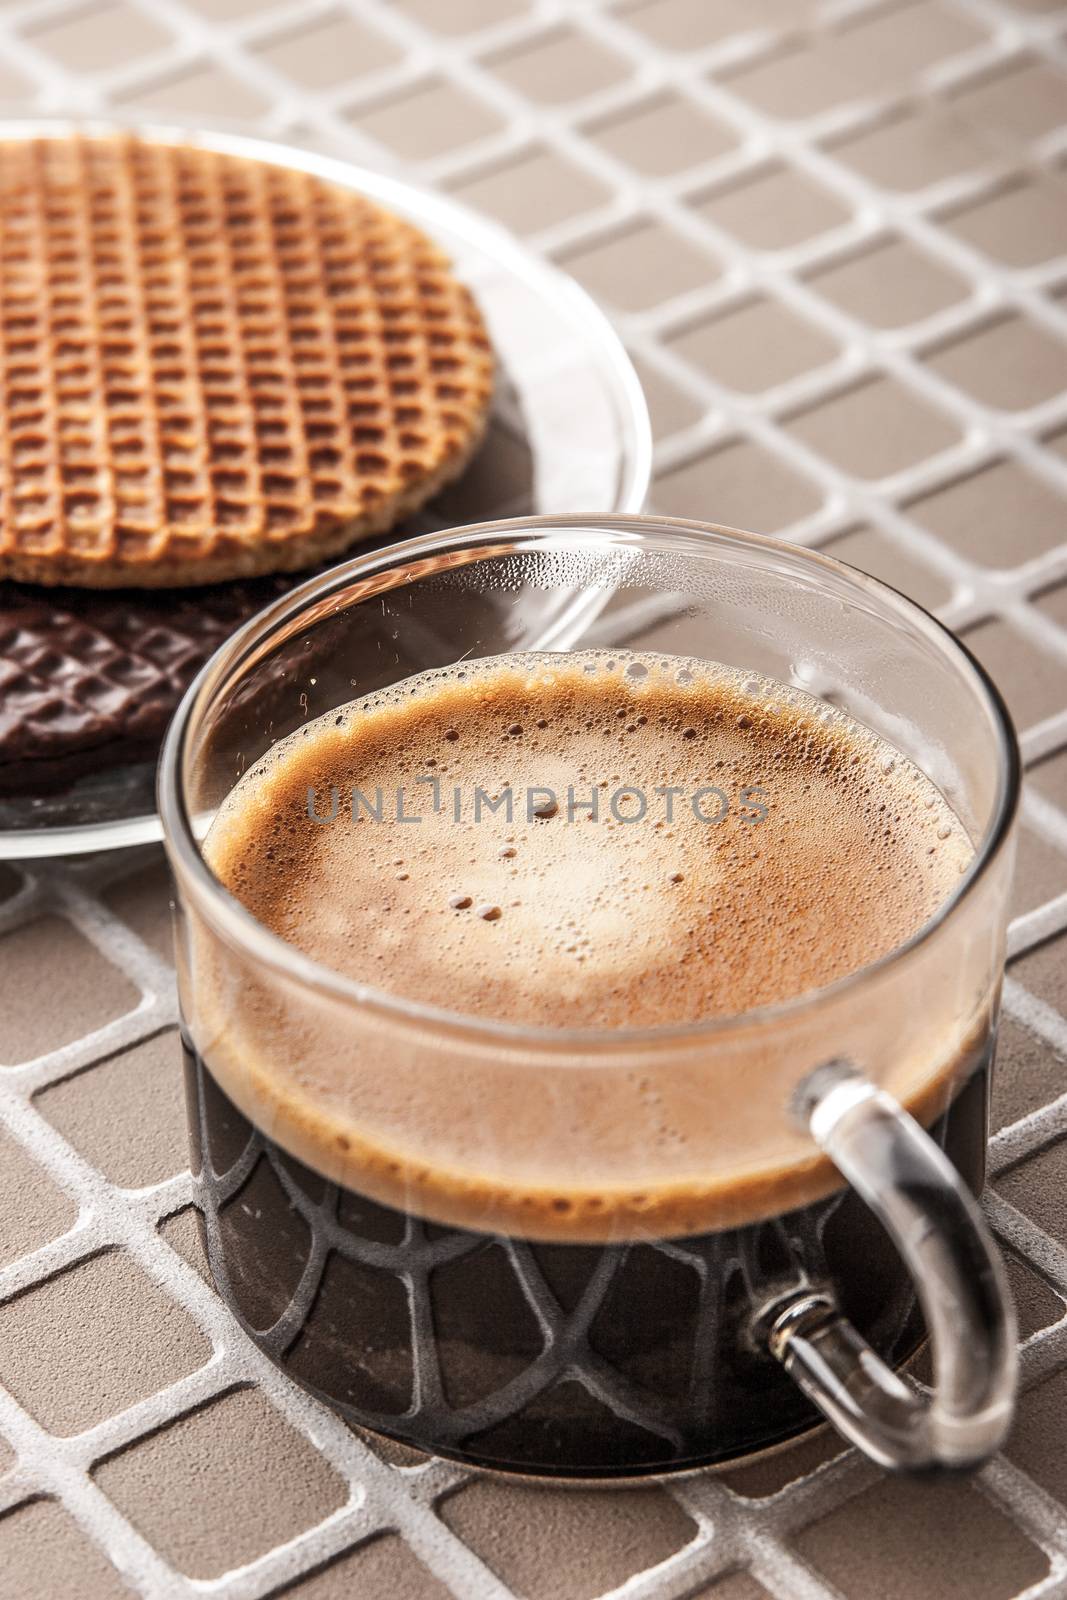 Wafers with cup of coffee on the relief background vertical by Deniskarpenkov